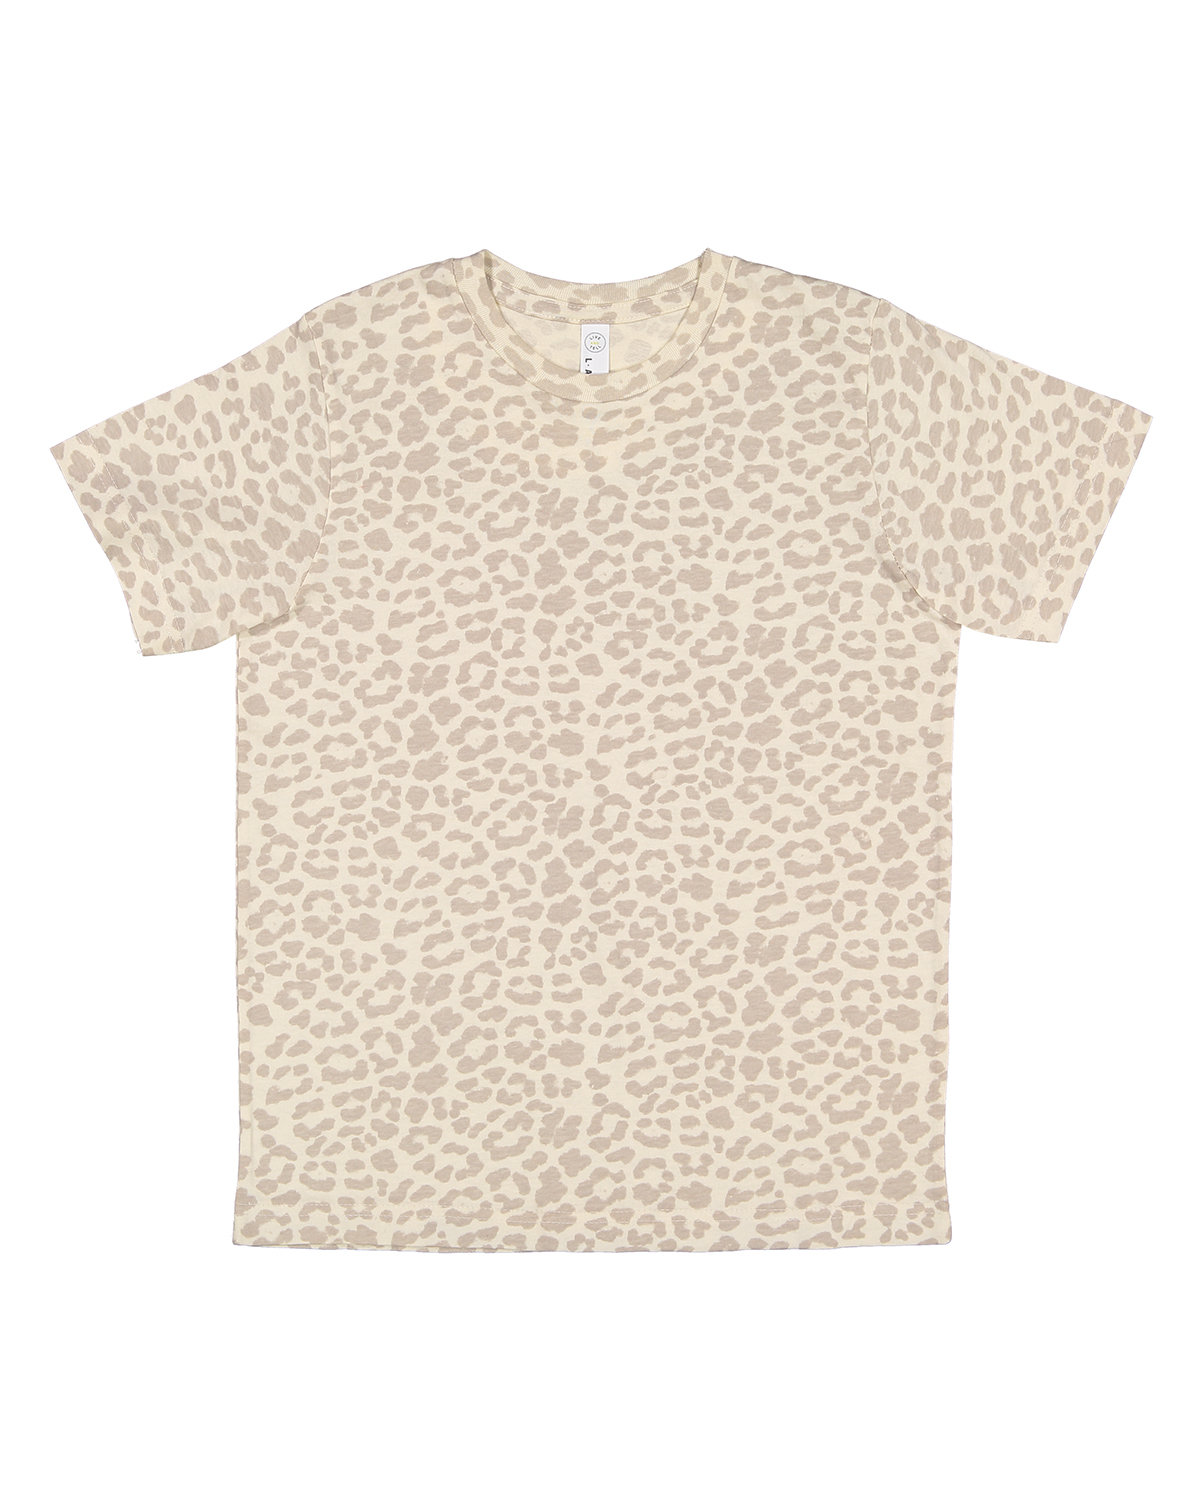 LAT Youth Fine Jersey T-Shirt NATURAL LEOPARD 